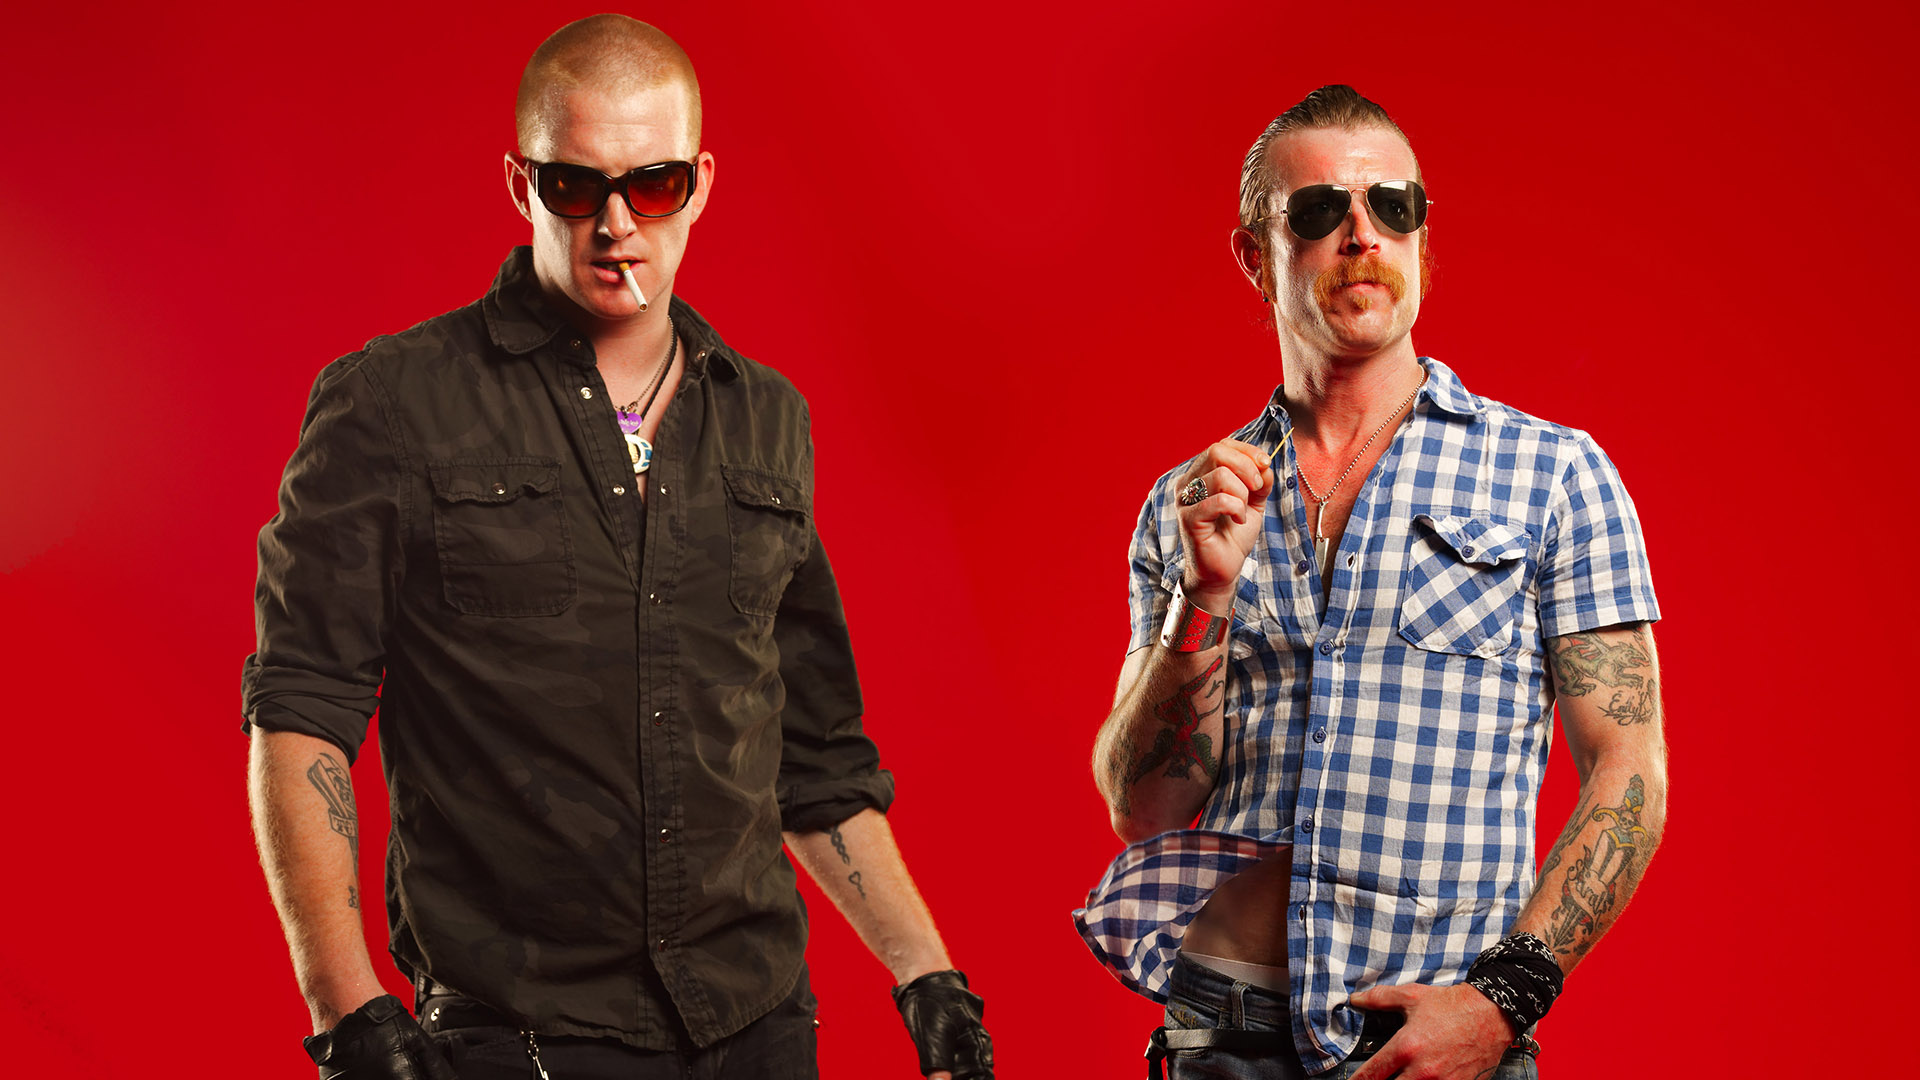 Eagles of Death Metal, HD wallpapers posted by Ryan Anderson, 1920x1080 Full HD Desktop